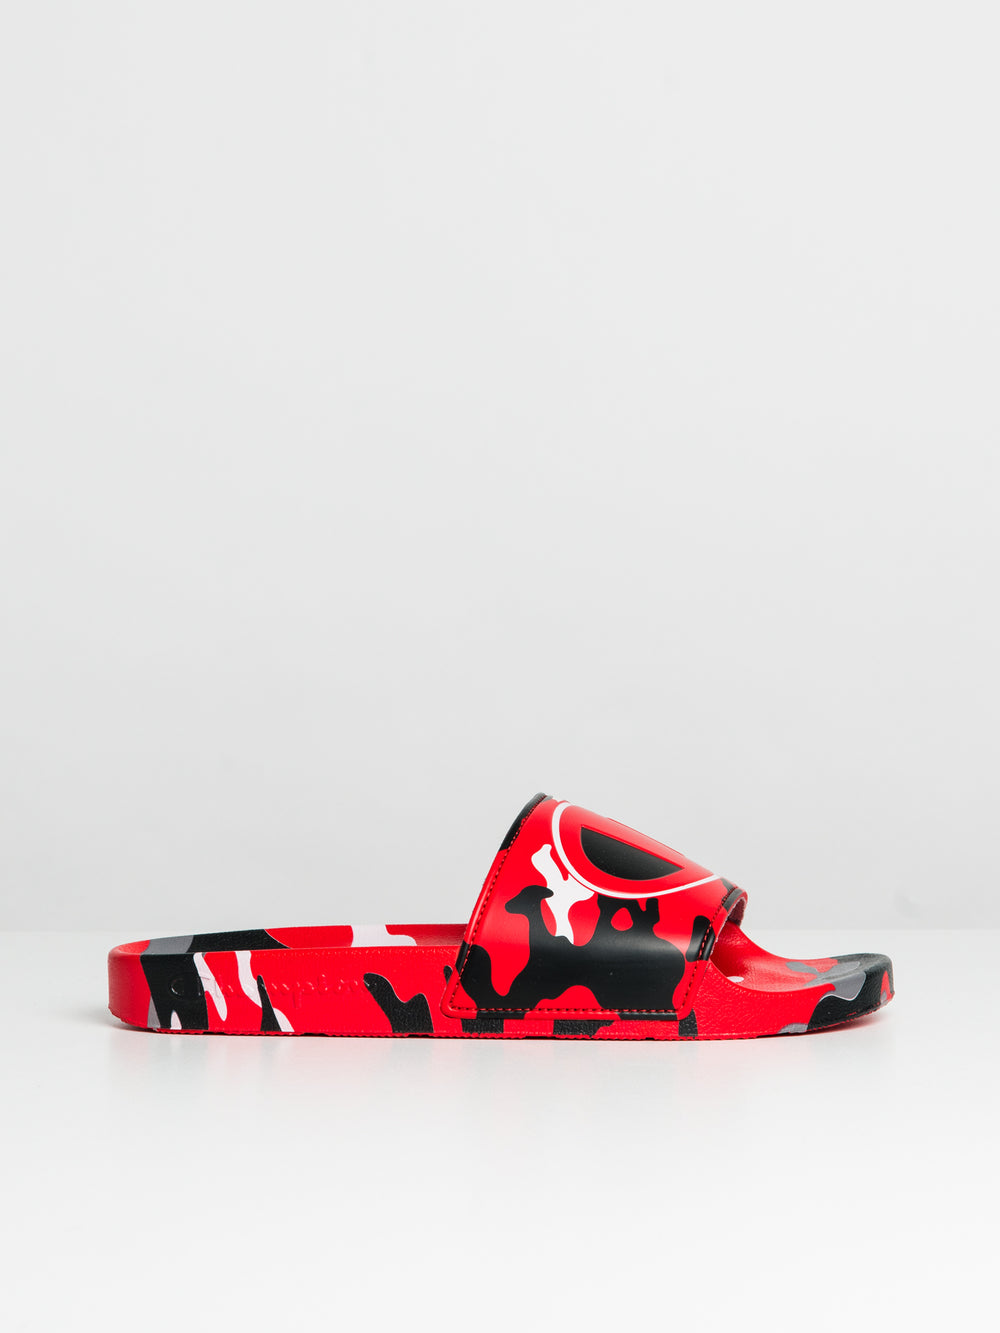 MENS CHAMPION IPO CAMO SLIDES - CLEARANCE